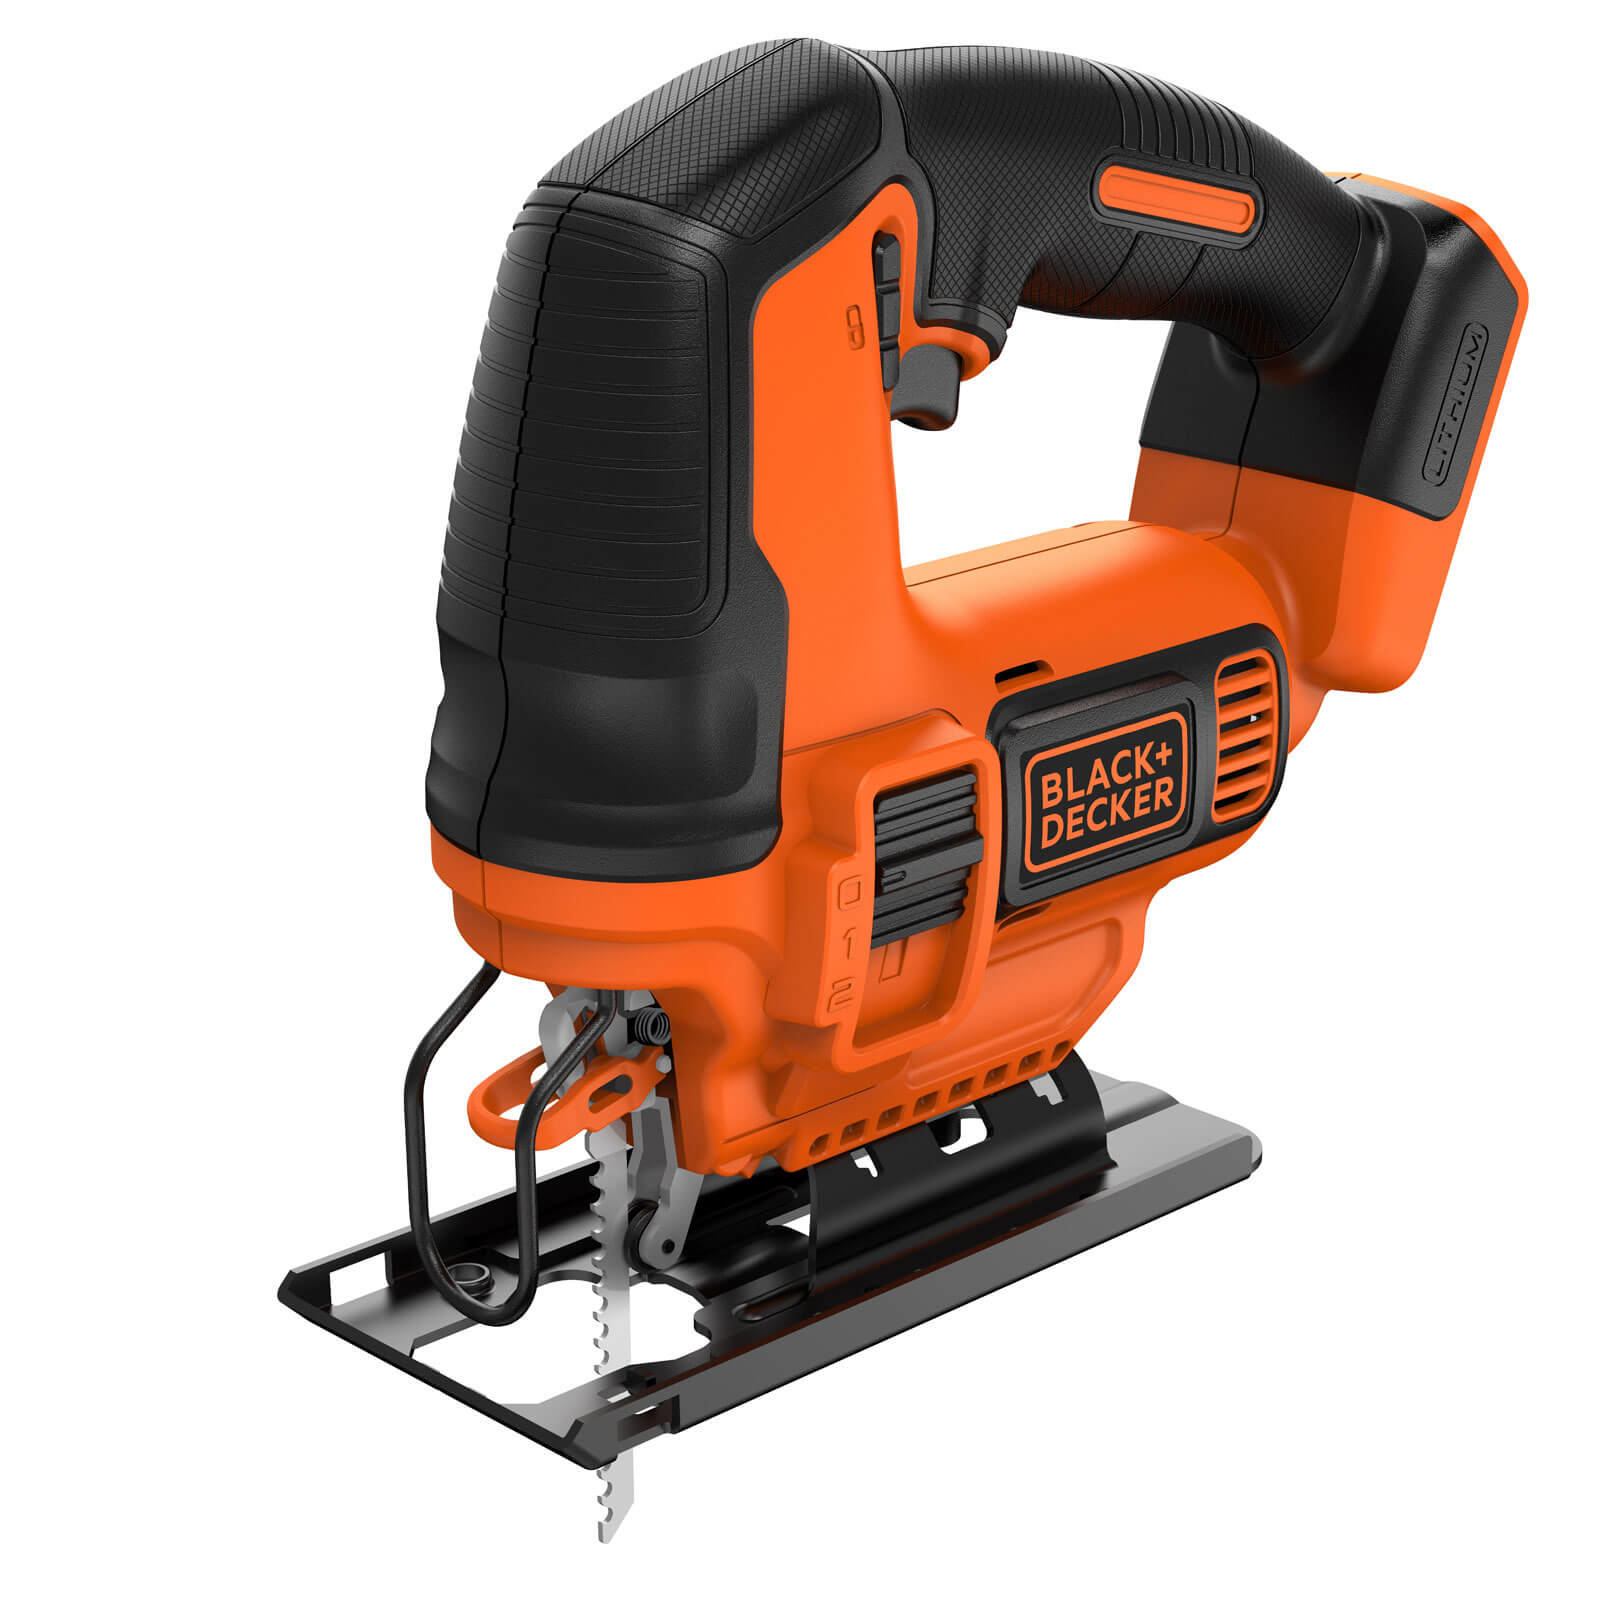 Image of Black and Decker BDCJS18 18v Cordless Jigsaw No Batteries No Charger No Case